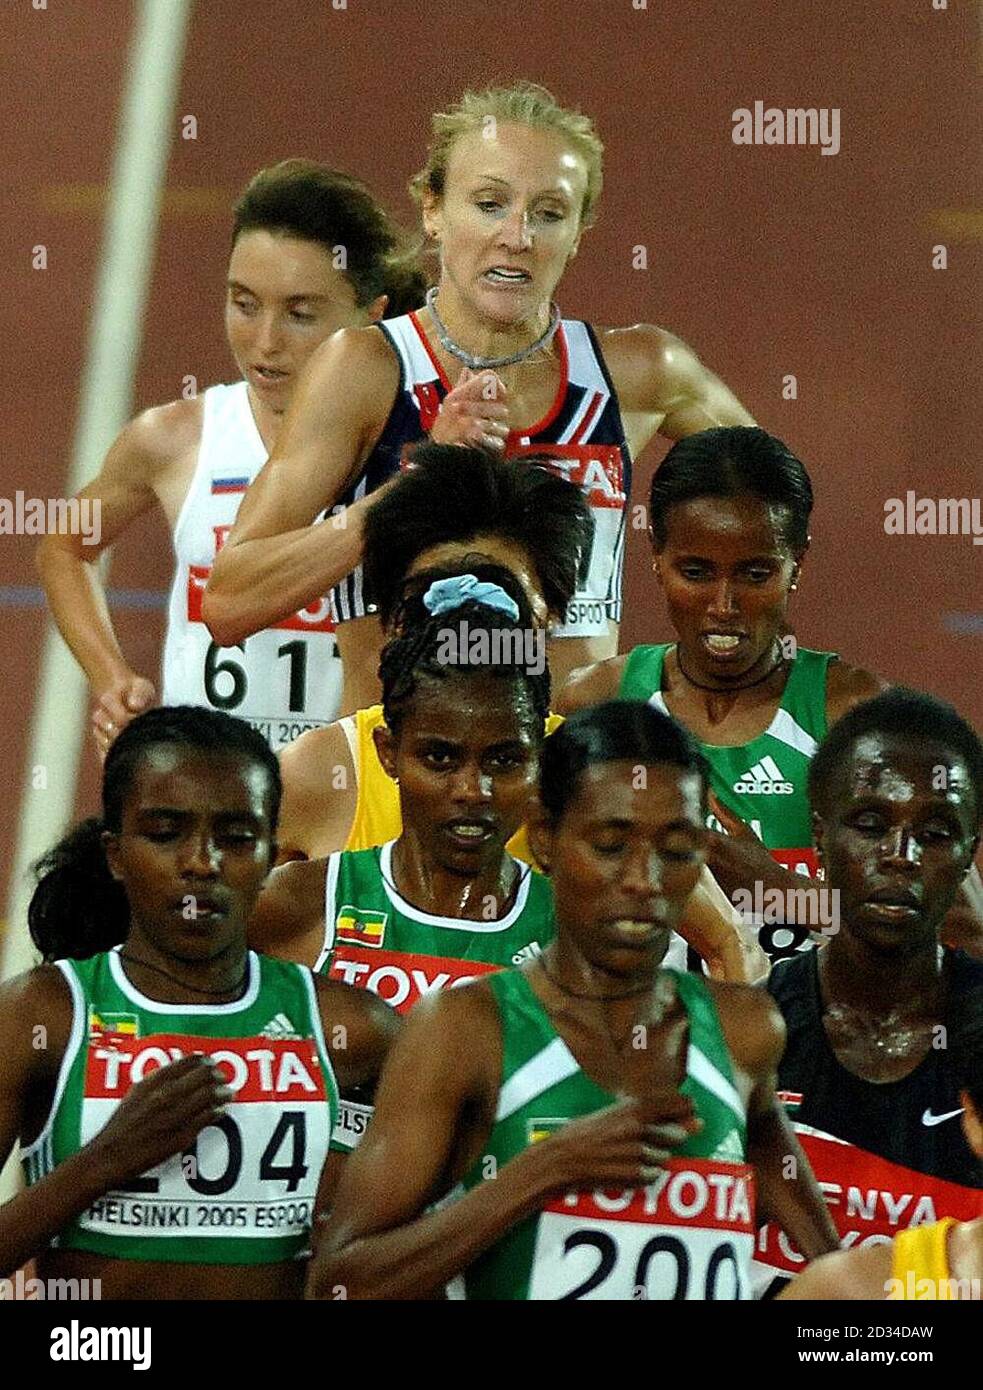 Great Britain's Paula Radcliffe (top) fails to keep up with the front runners in the women's 10,000m final. Stock Photo